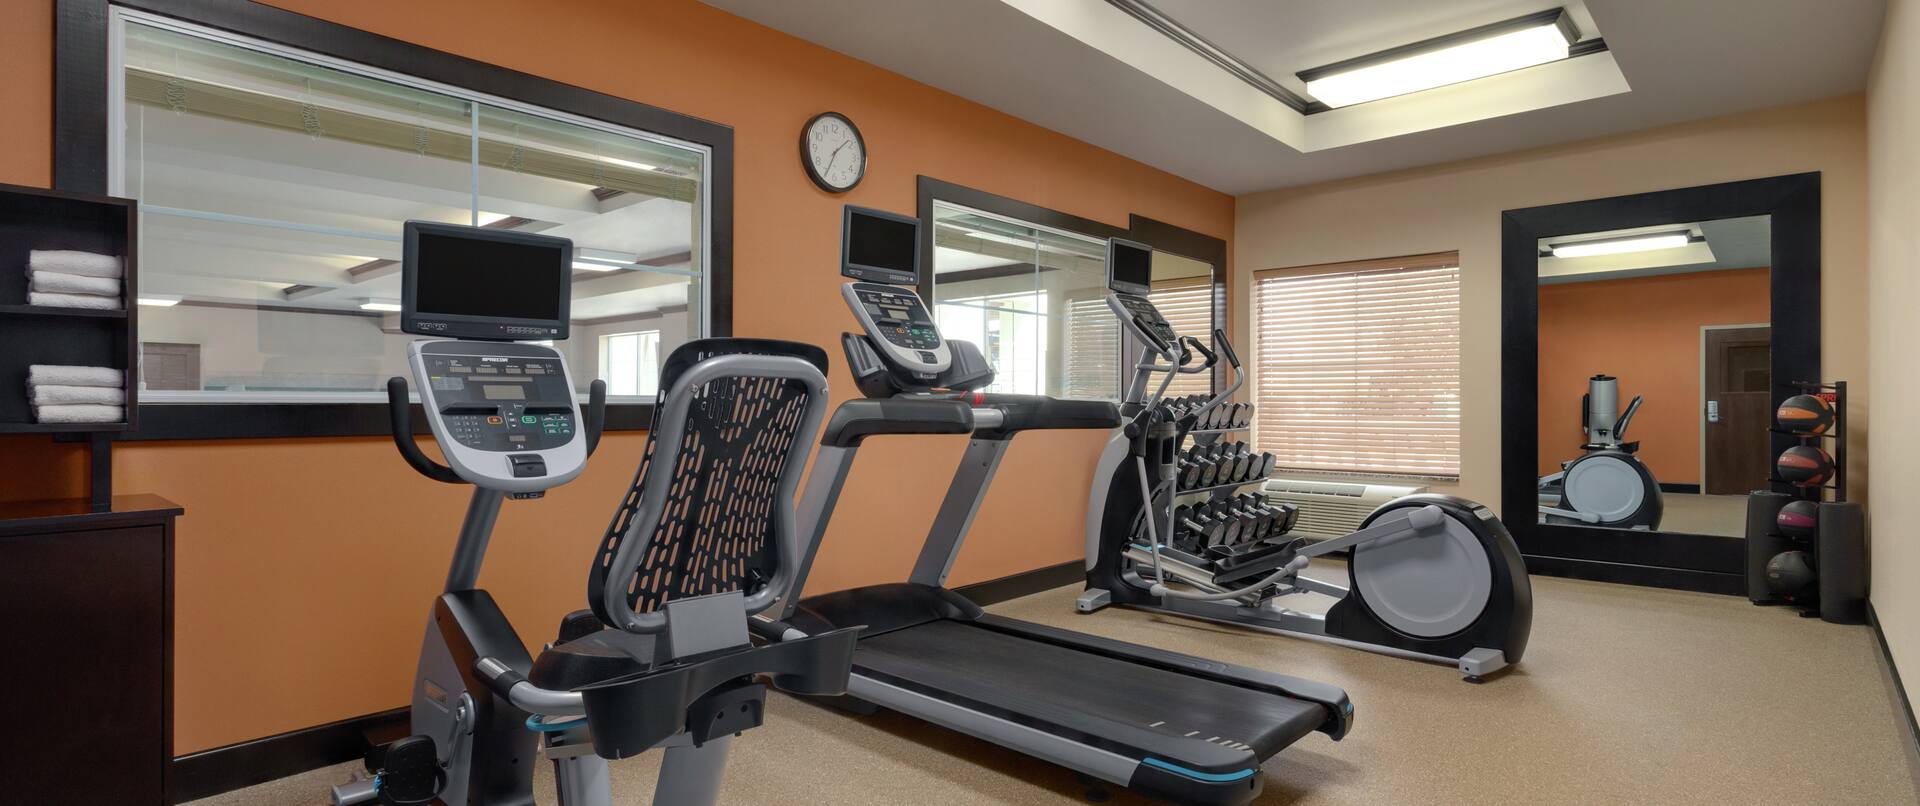 Spacious on-site fitness center fully equipped with cardio machines, free weights, and medicine balls.